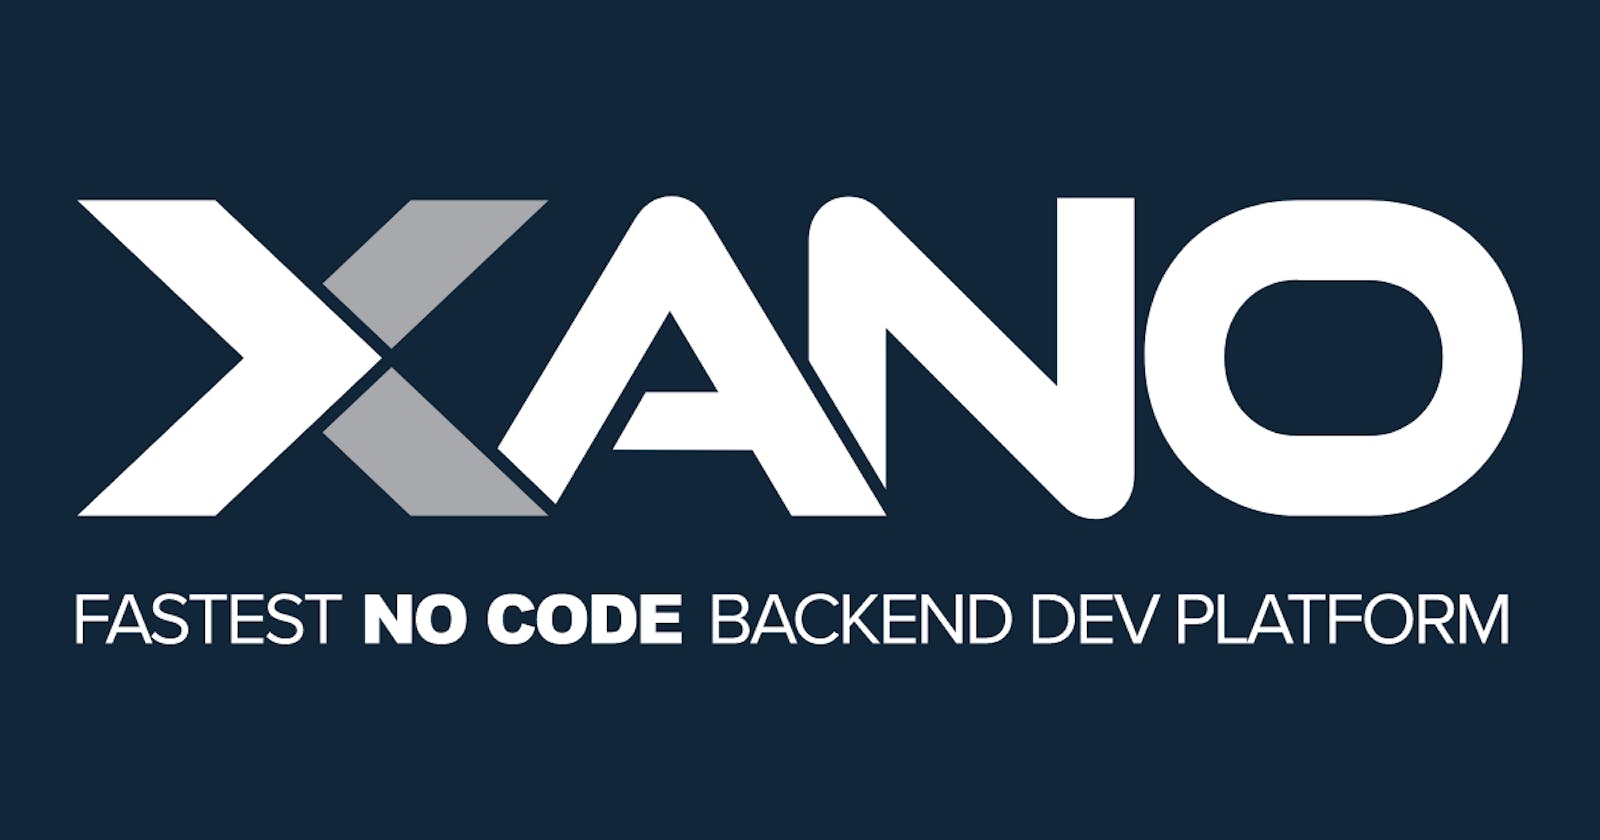 Day 2 of the challenge, creating a database in Xano